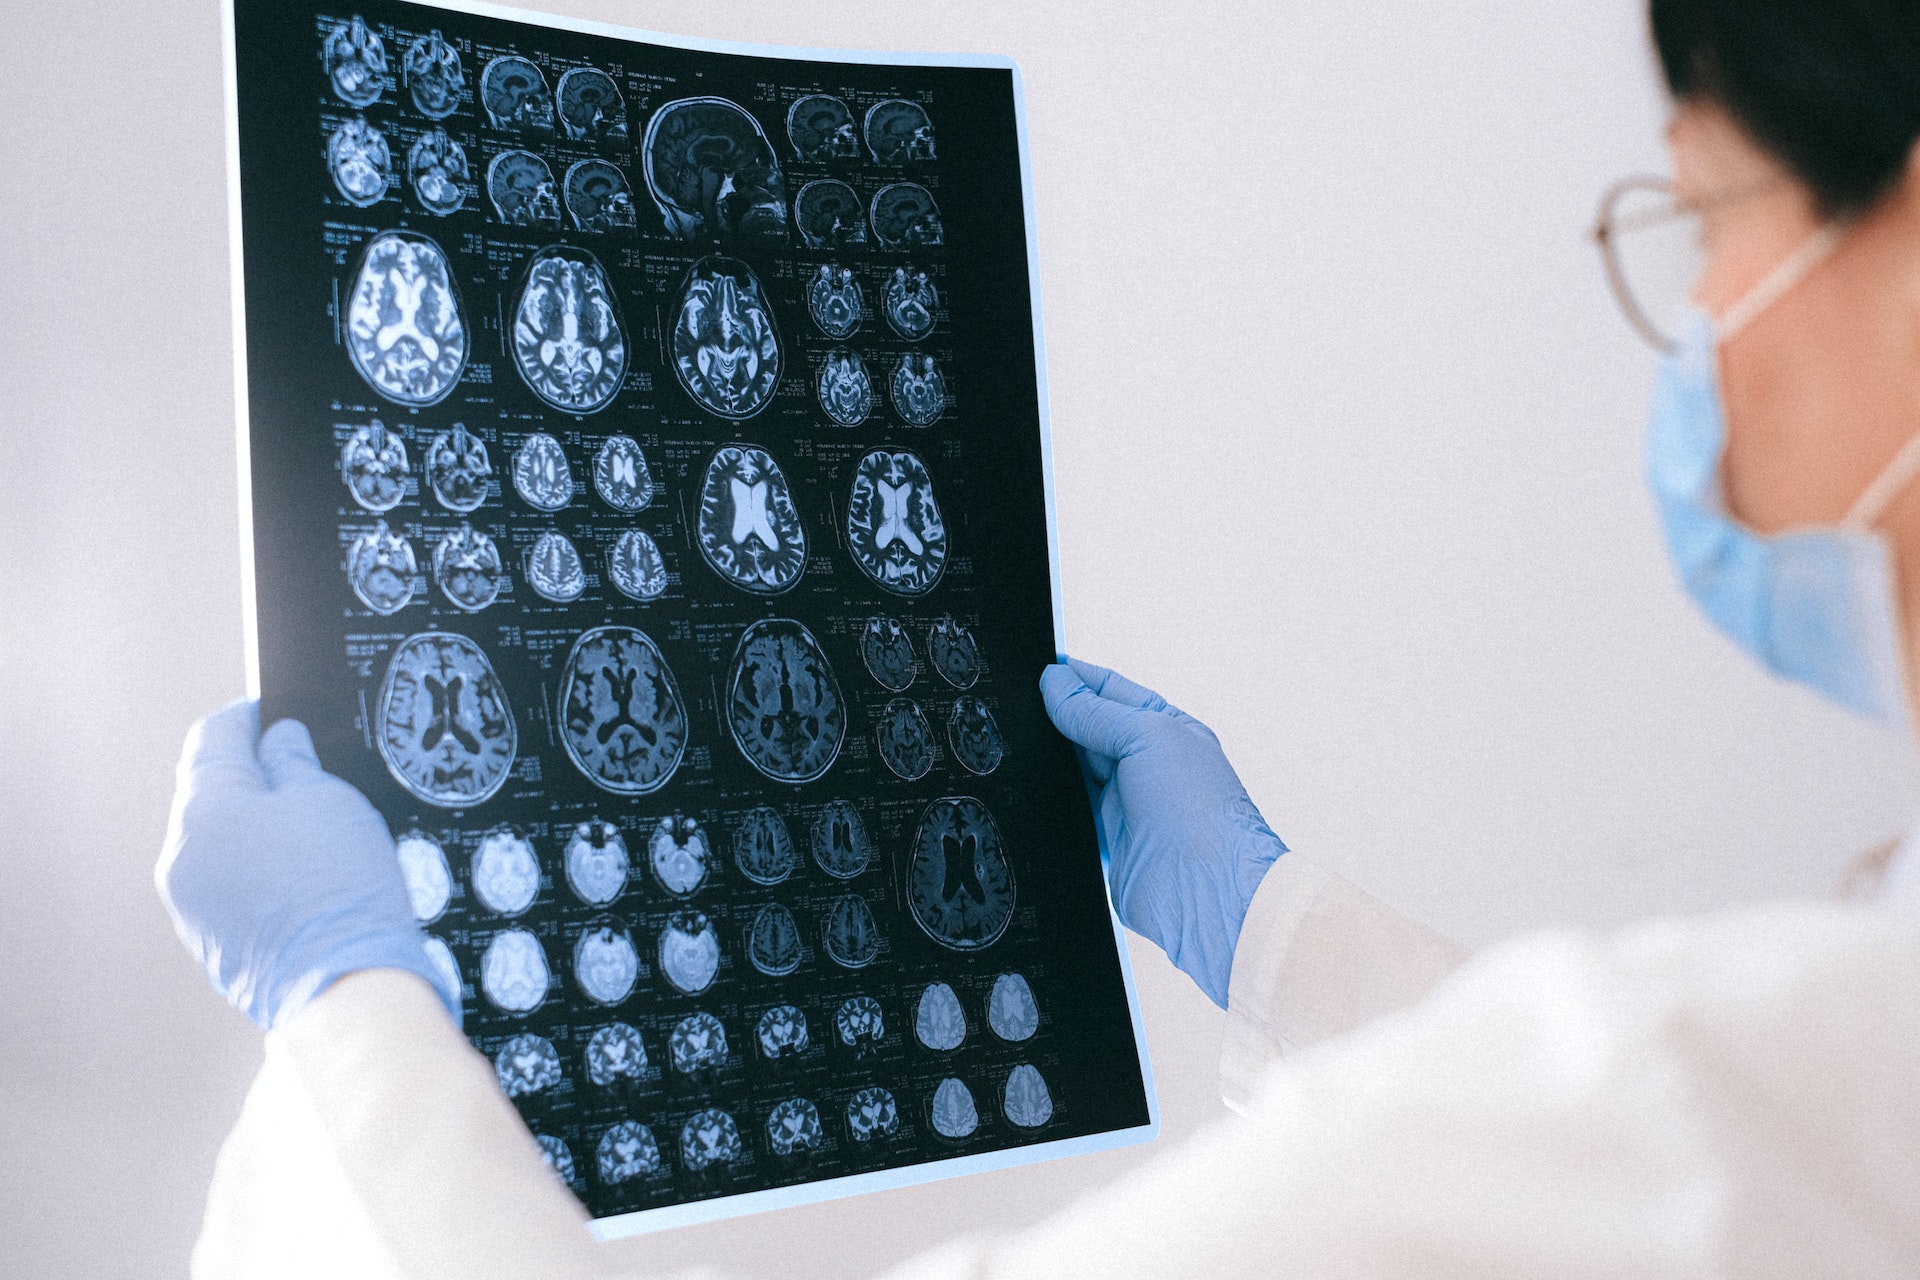 A doctor holding up a sheet of fMRI scan results from a brain